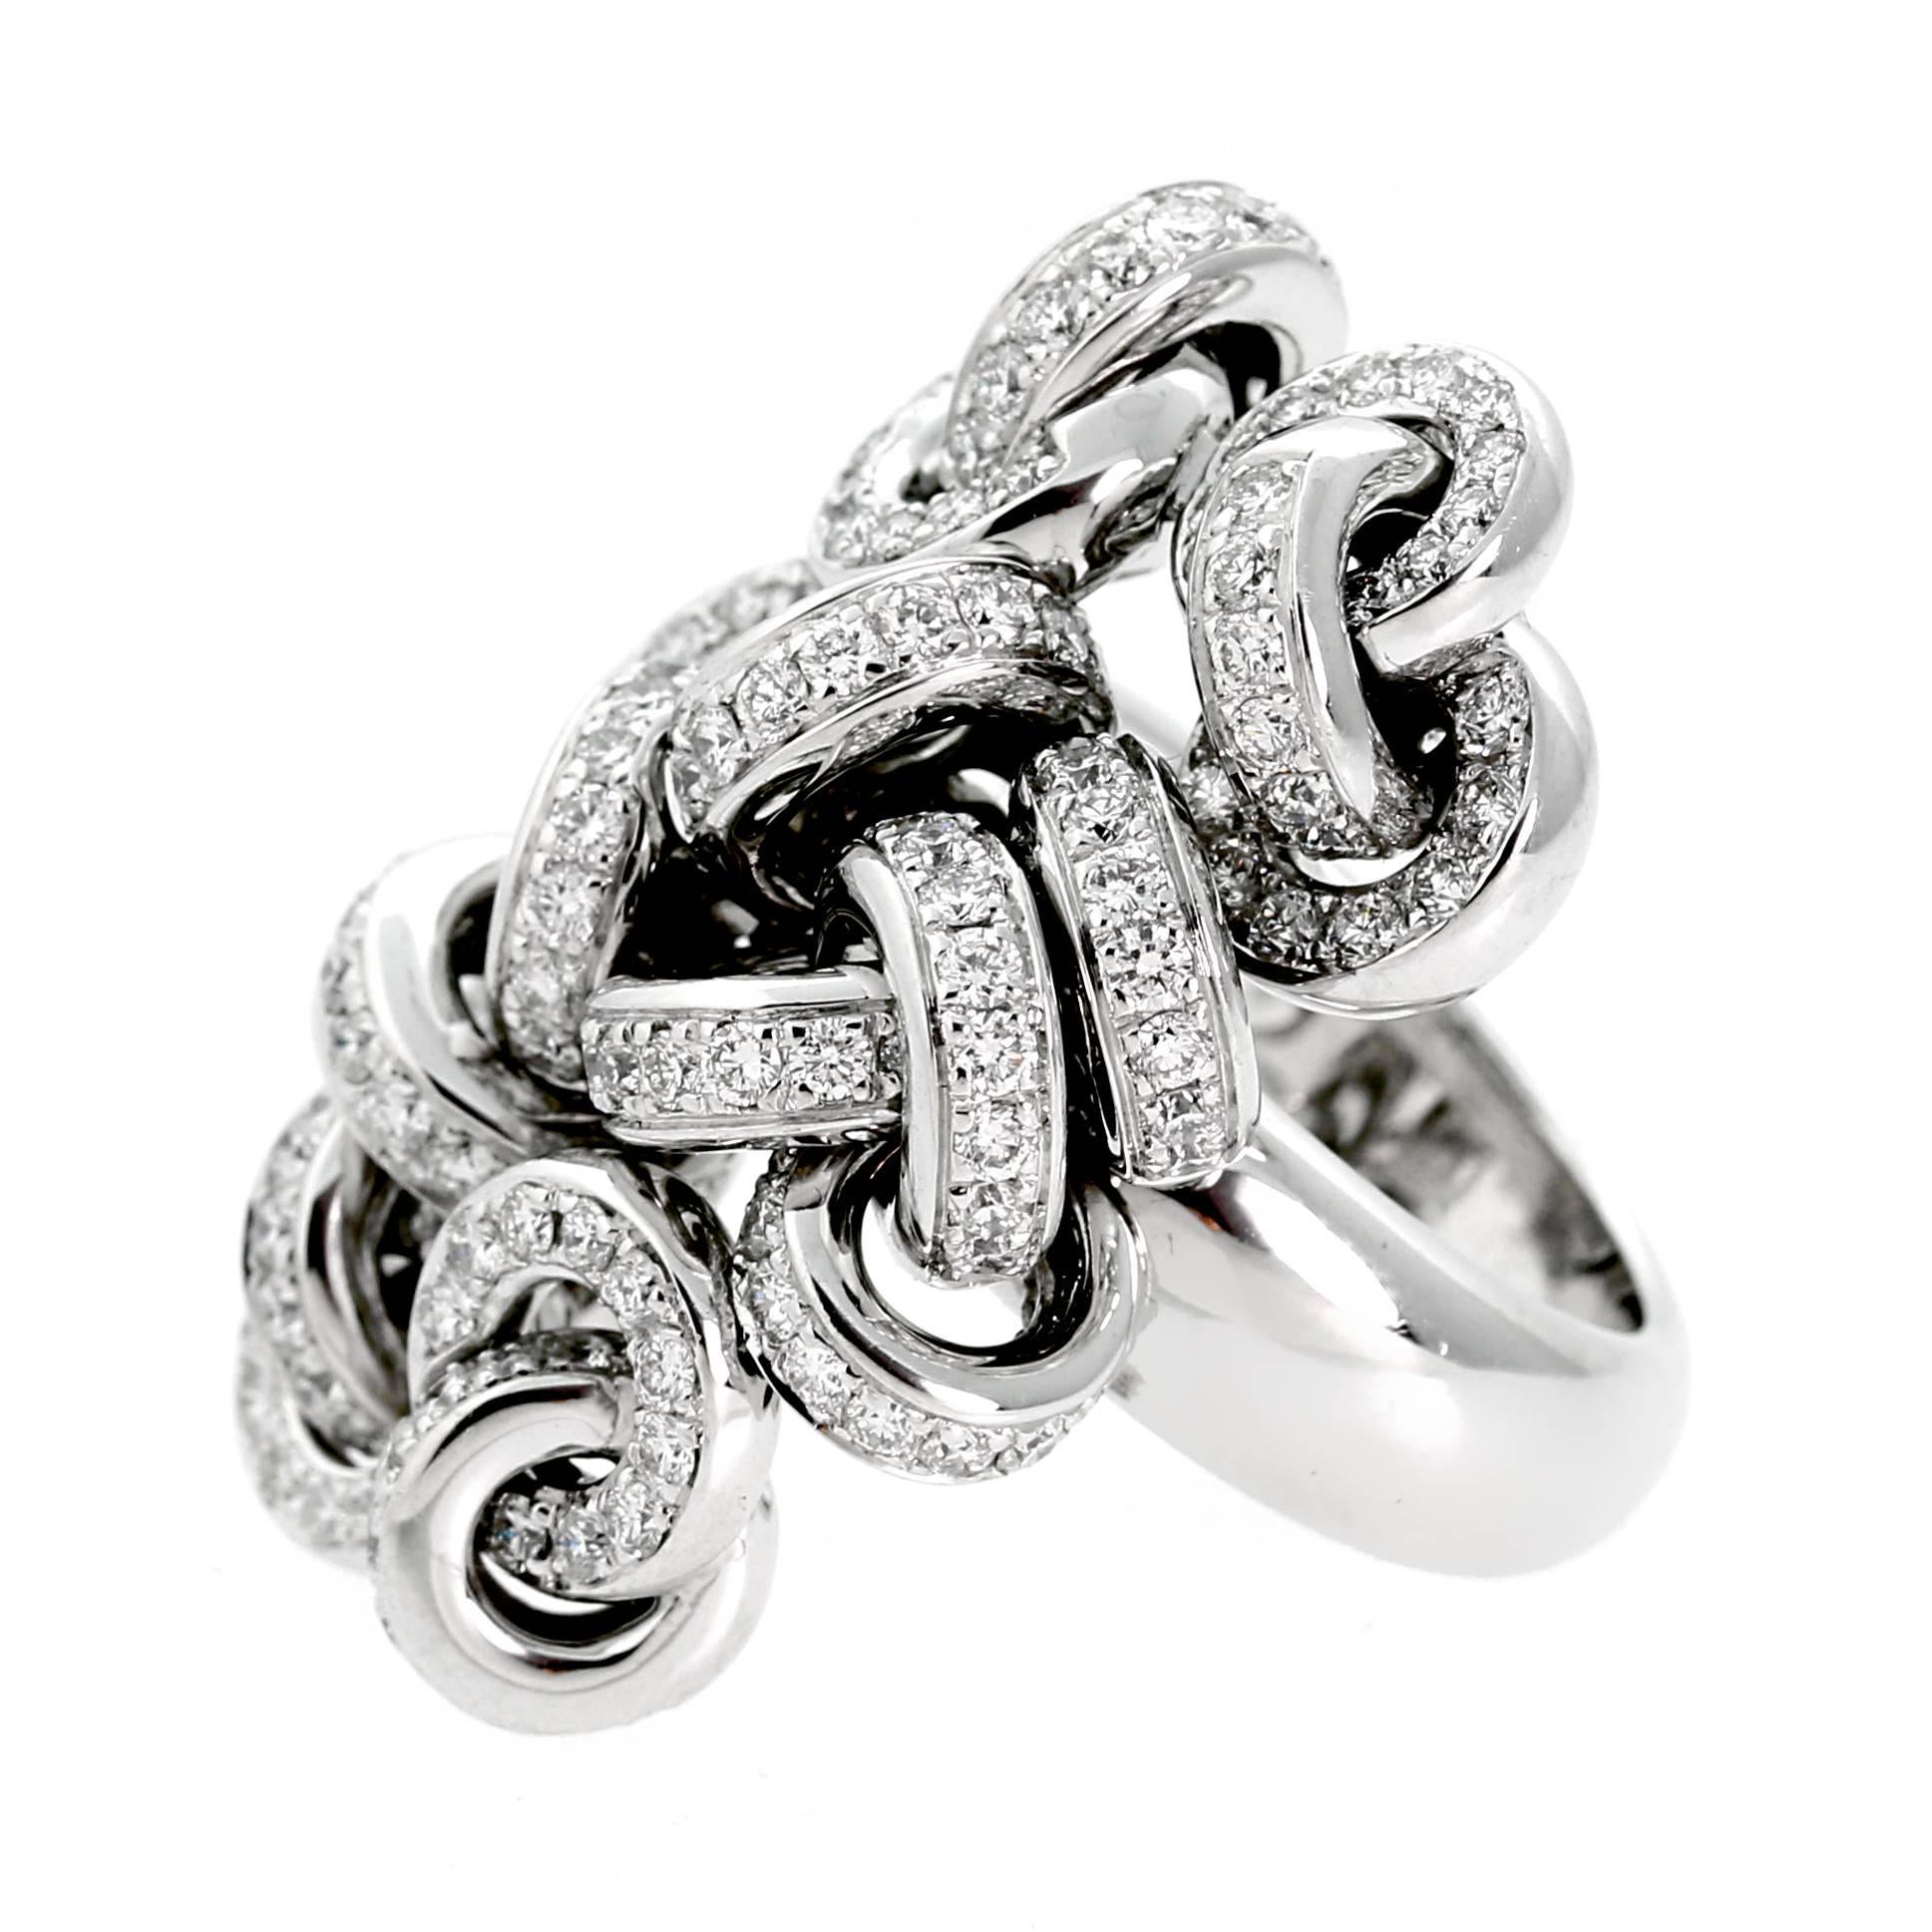 A fabulous De Grisogono diamond cocktail ring set with 3cts of the finest round brilliant cut diamonds in 18k white gold. Size 6.75

Inventory ID: 0000561